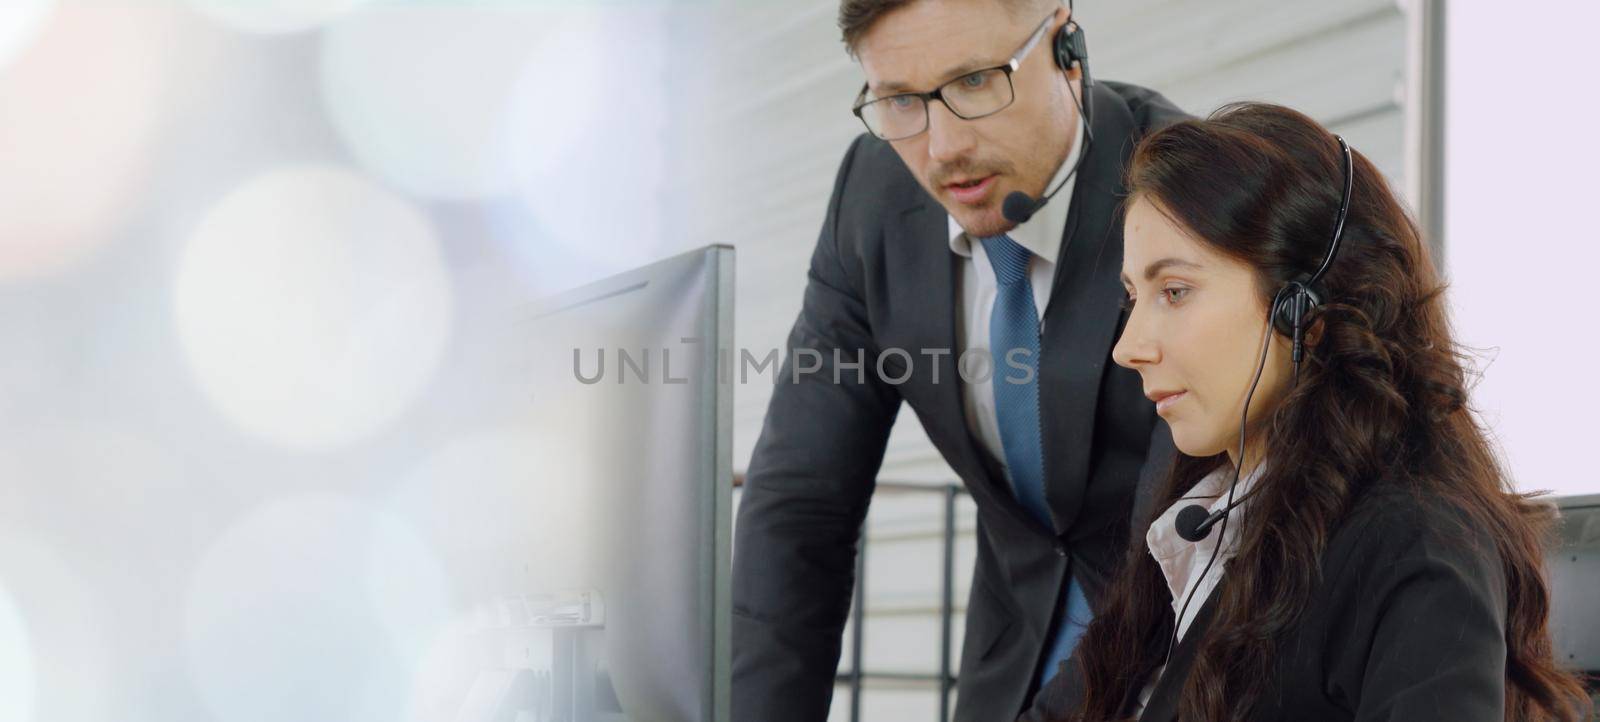 Business people wearing headset working in office to support remote customer or colleague. Call center, telemarketing, customer support agent provide service in broaden view .